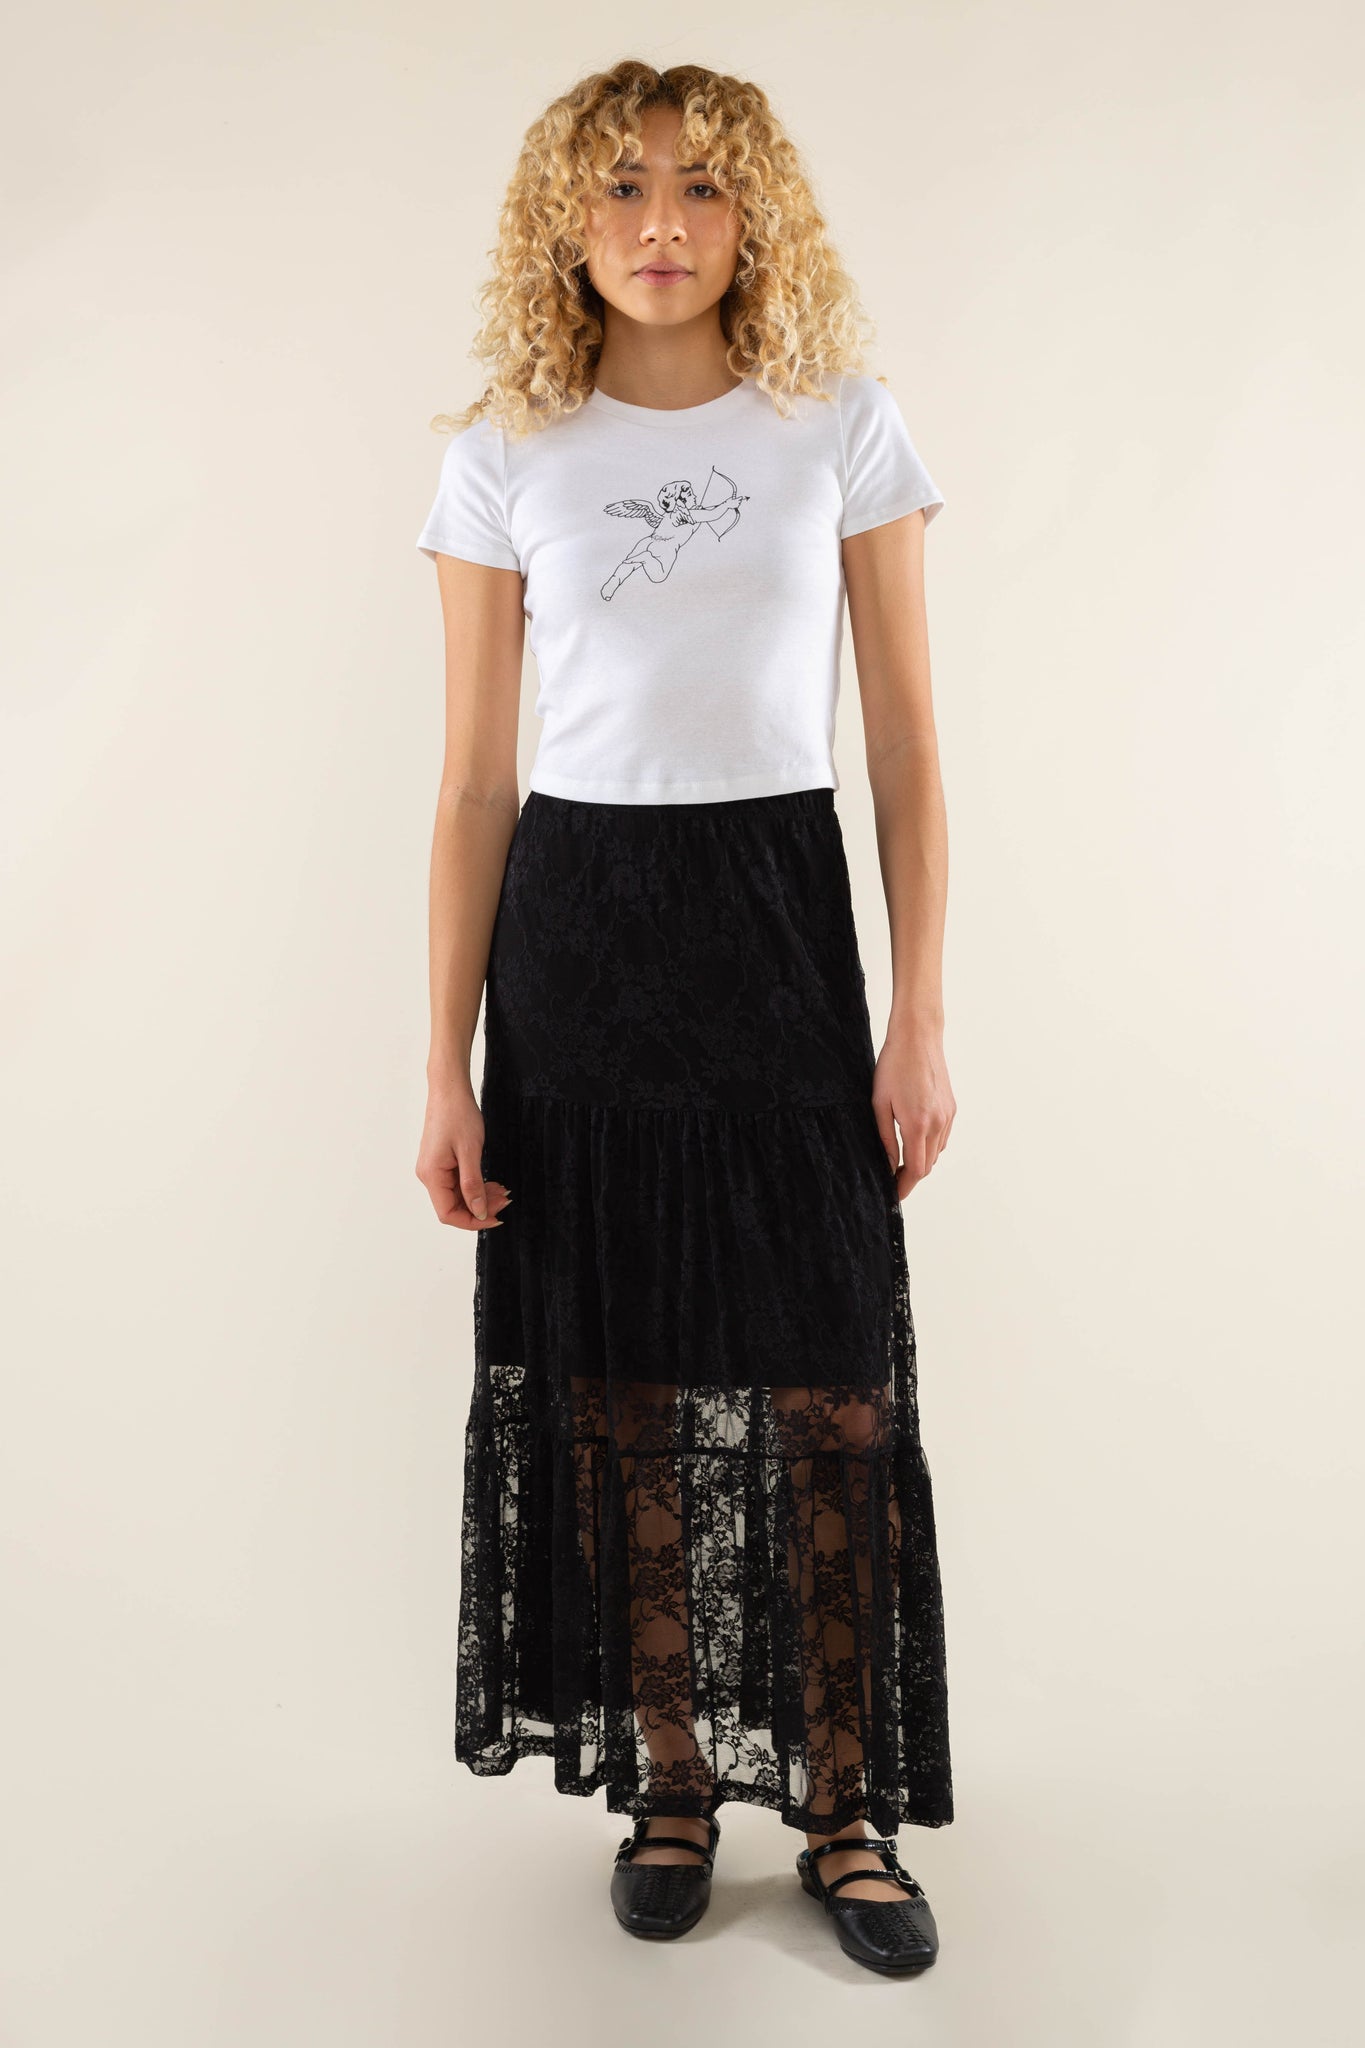 Lace Tiered Skirt with Slip